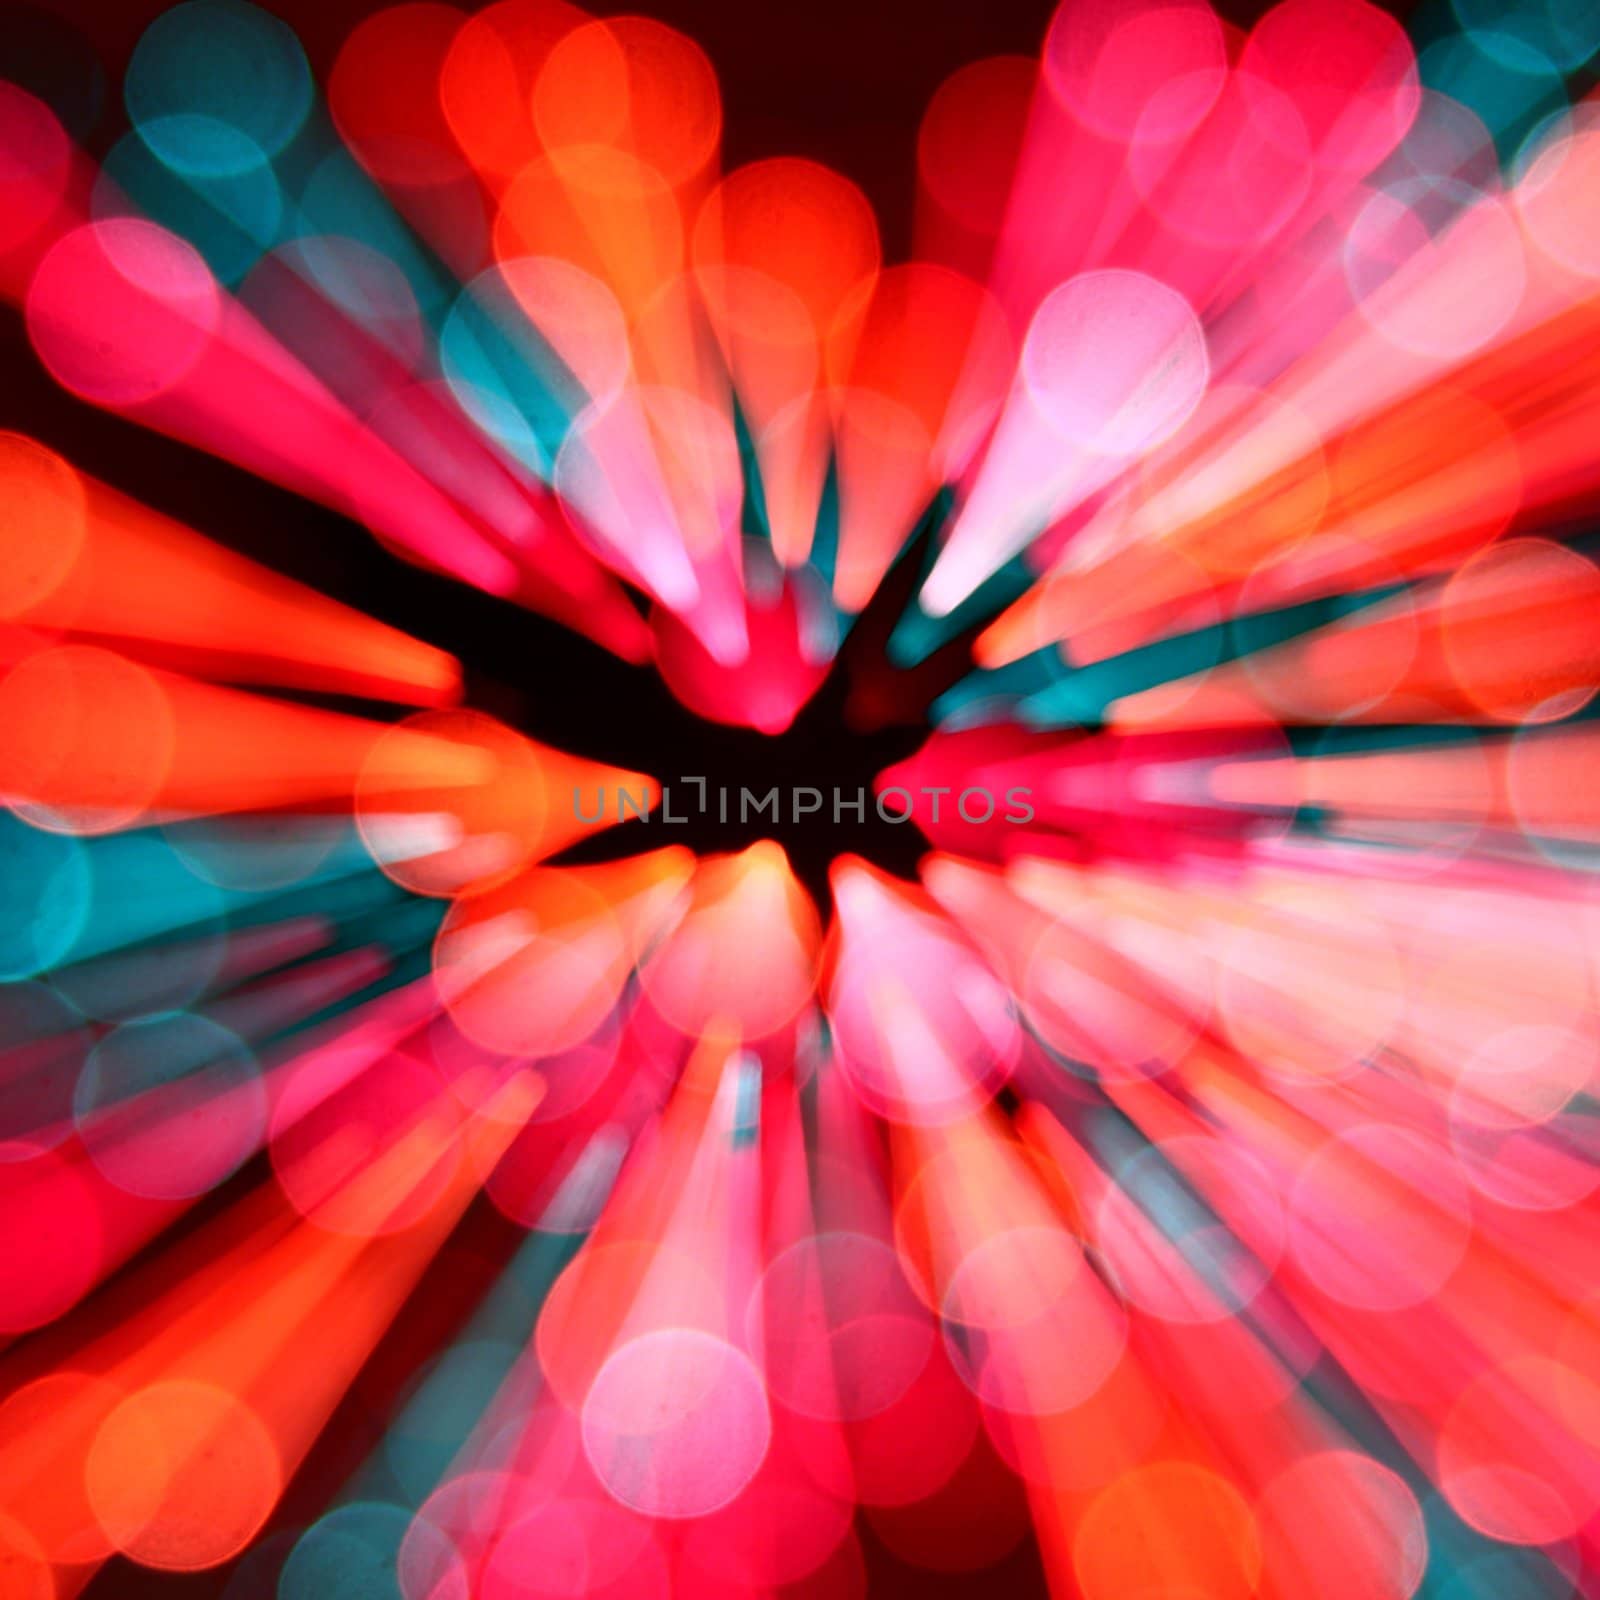 speed motion bokeh abstract background